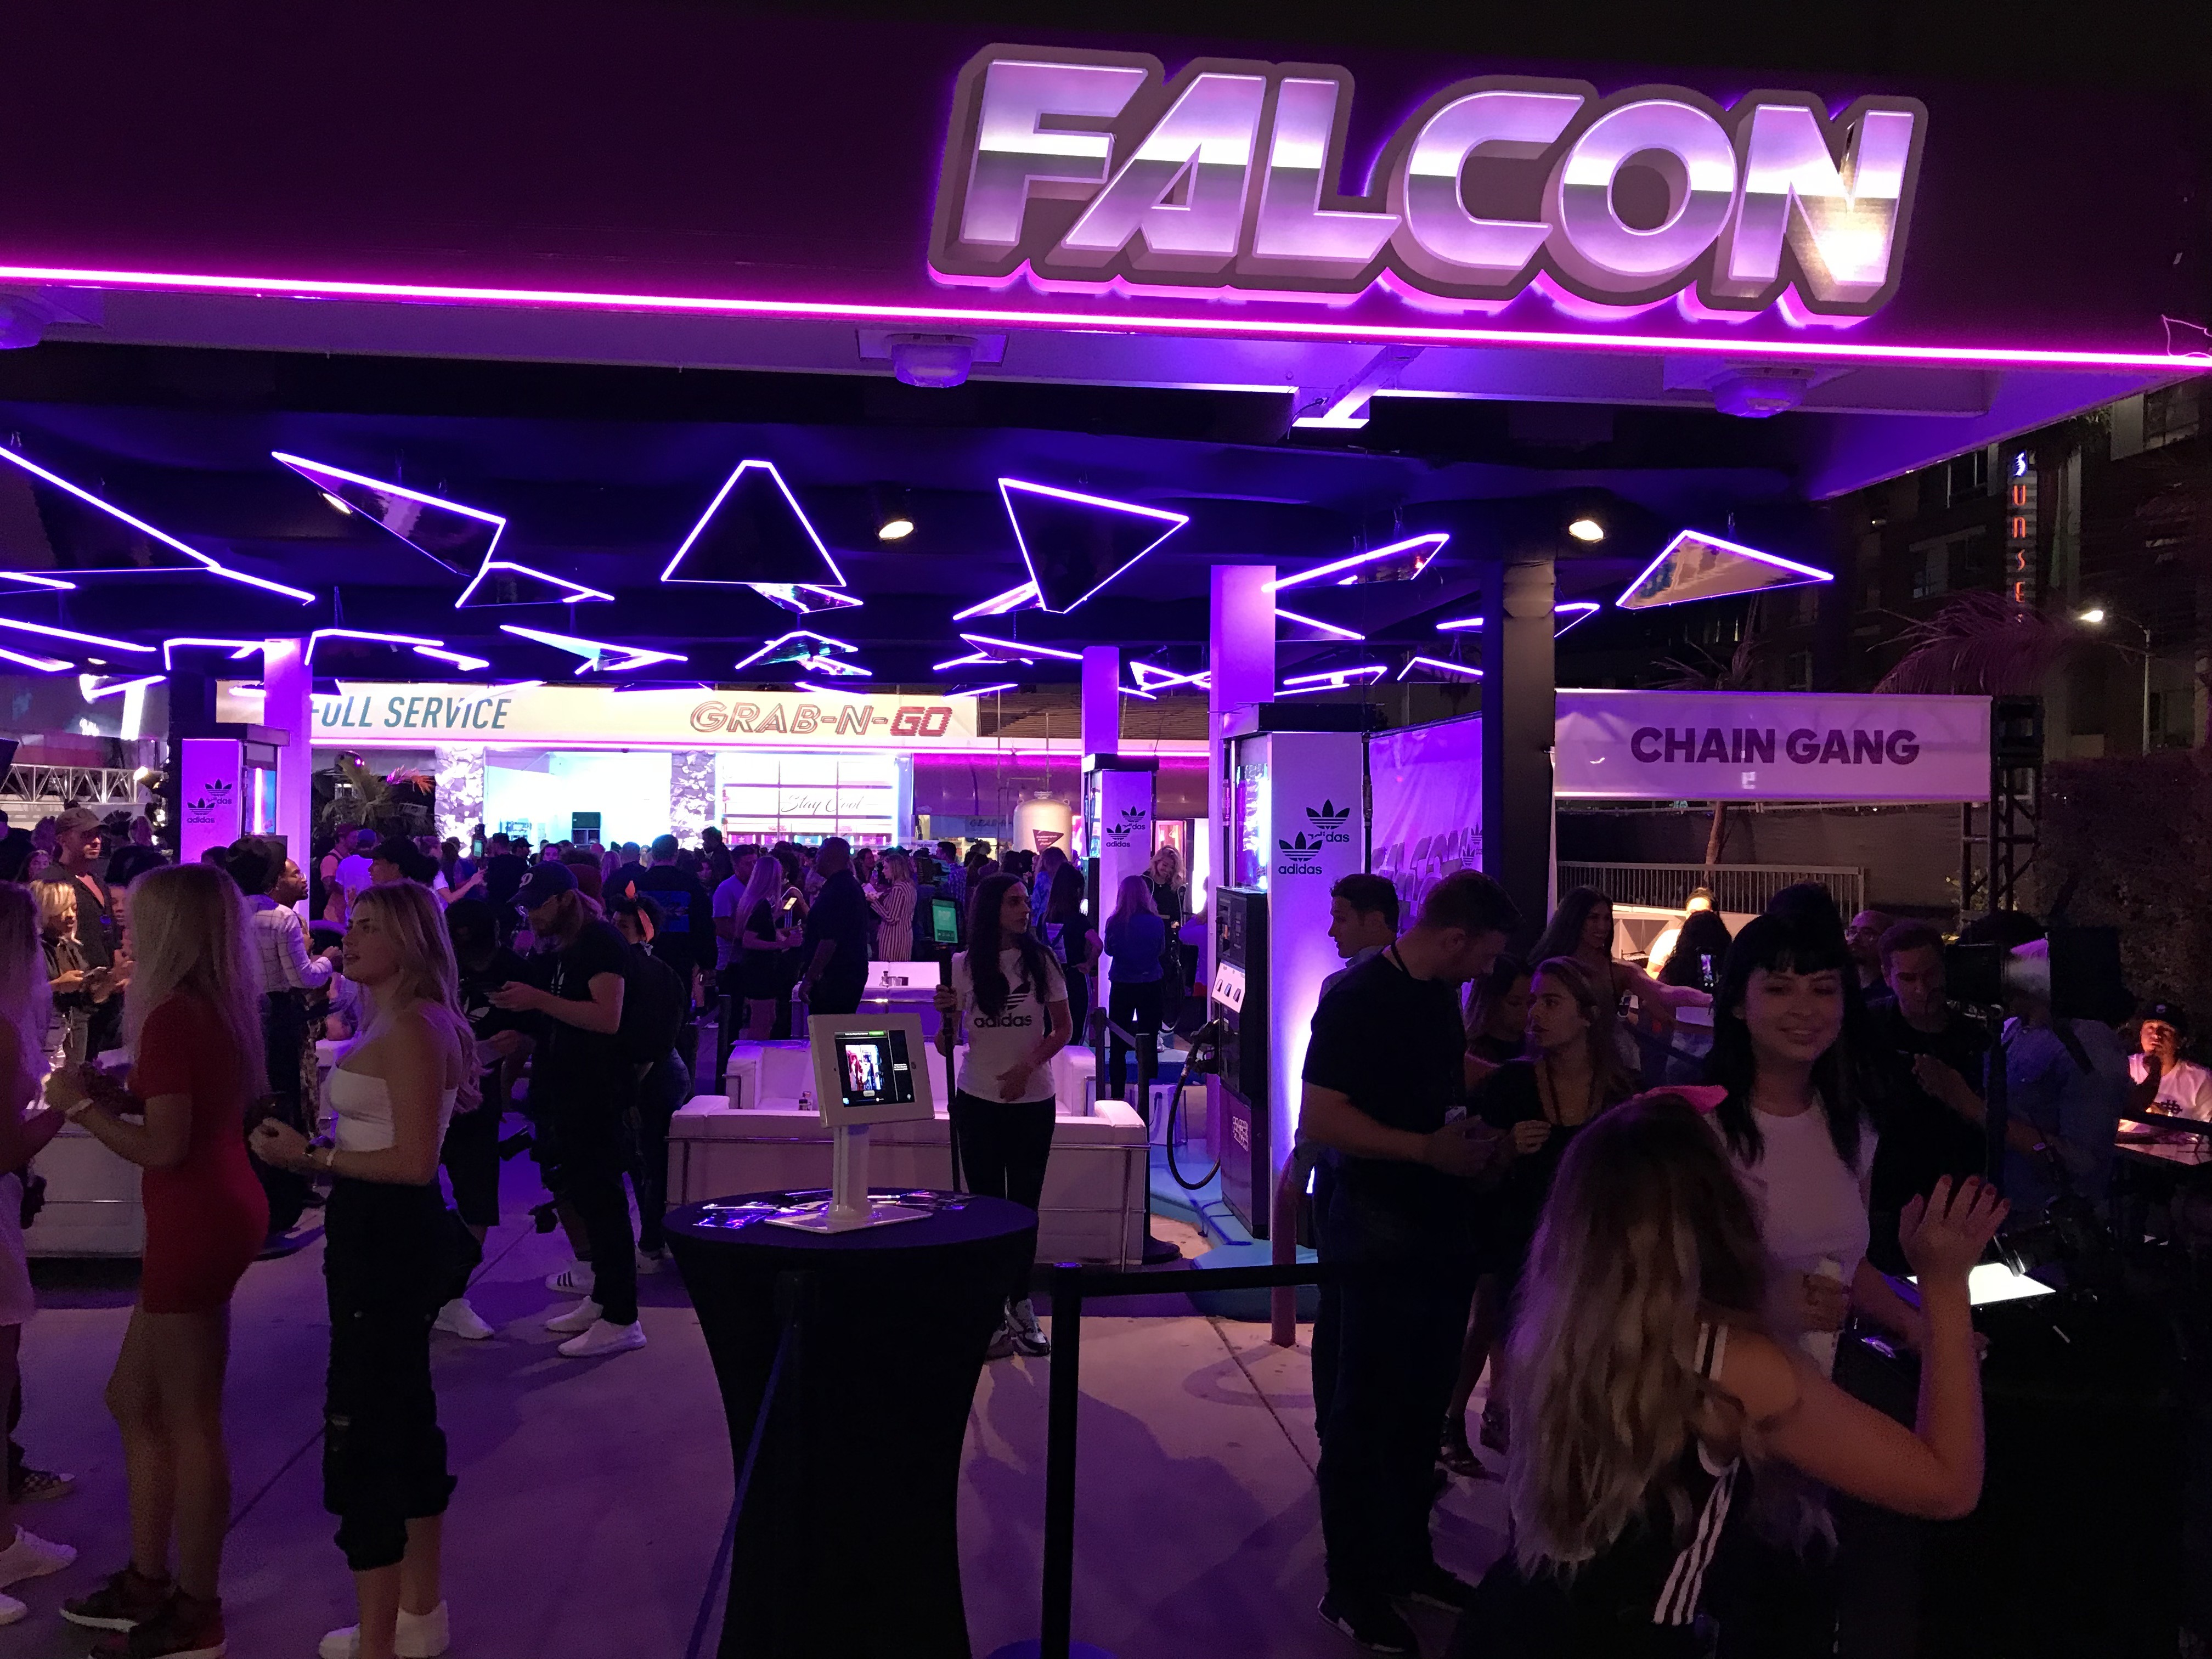 Image Options Helps out with an Incredible Event Space Launch for Adidas Falcon Sneakers